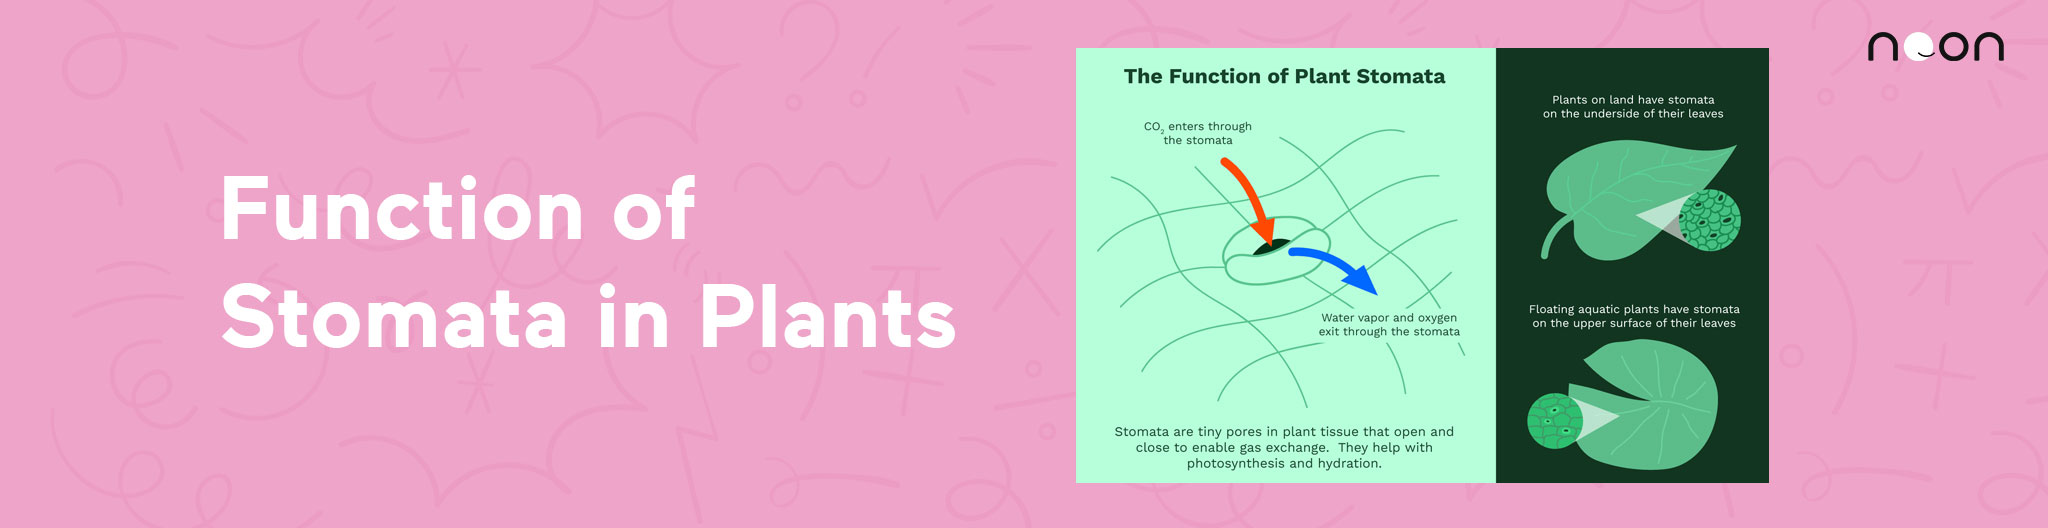 Function of Stomata in Plants